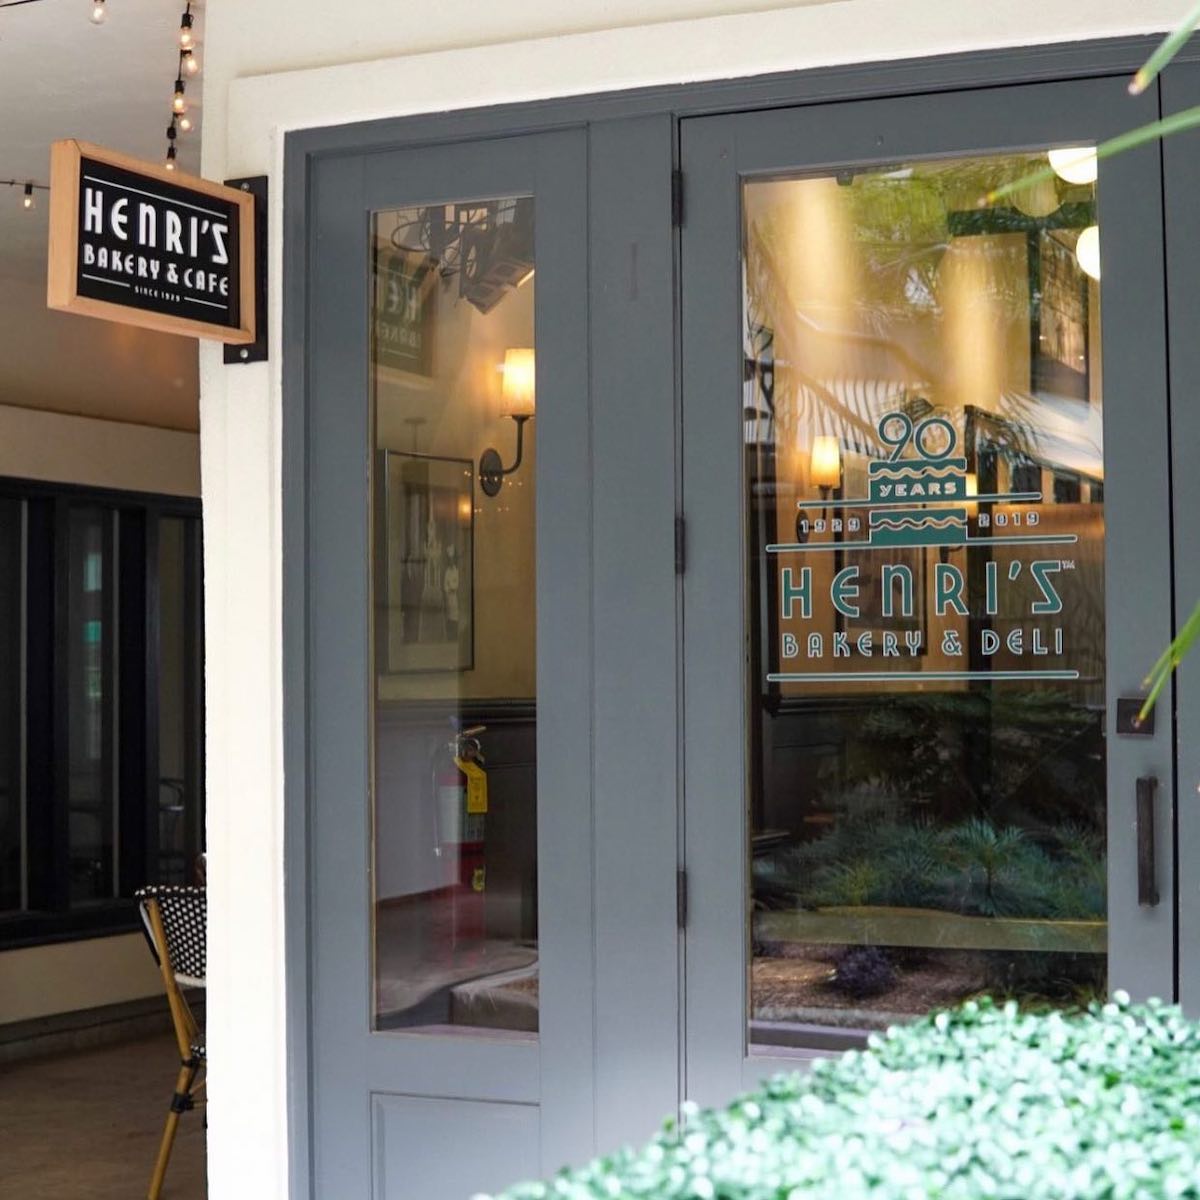 Brookhaven is Getting Henri’s Bakery & Deli